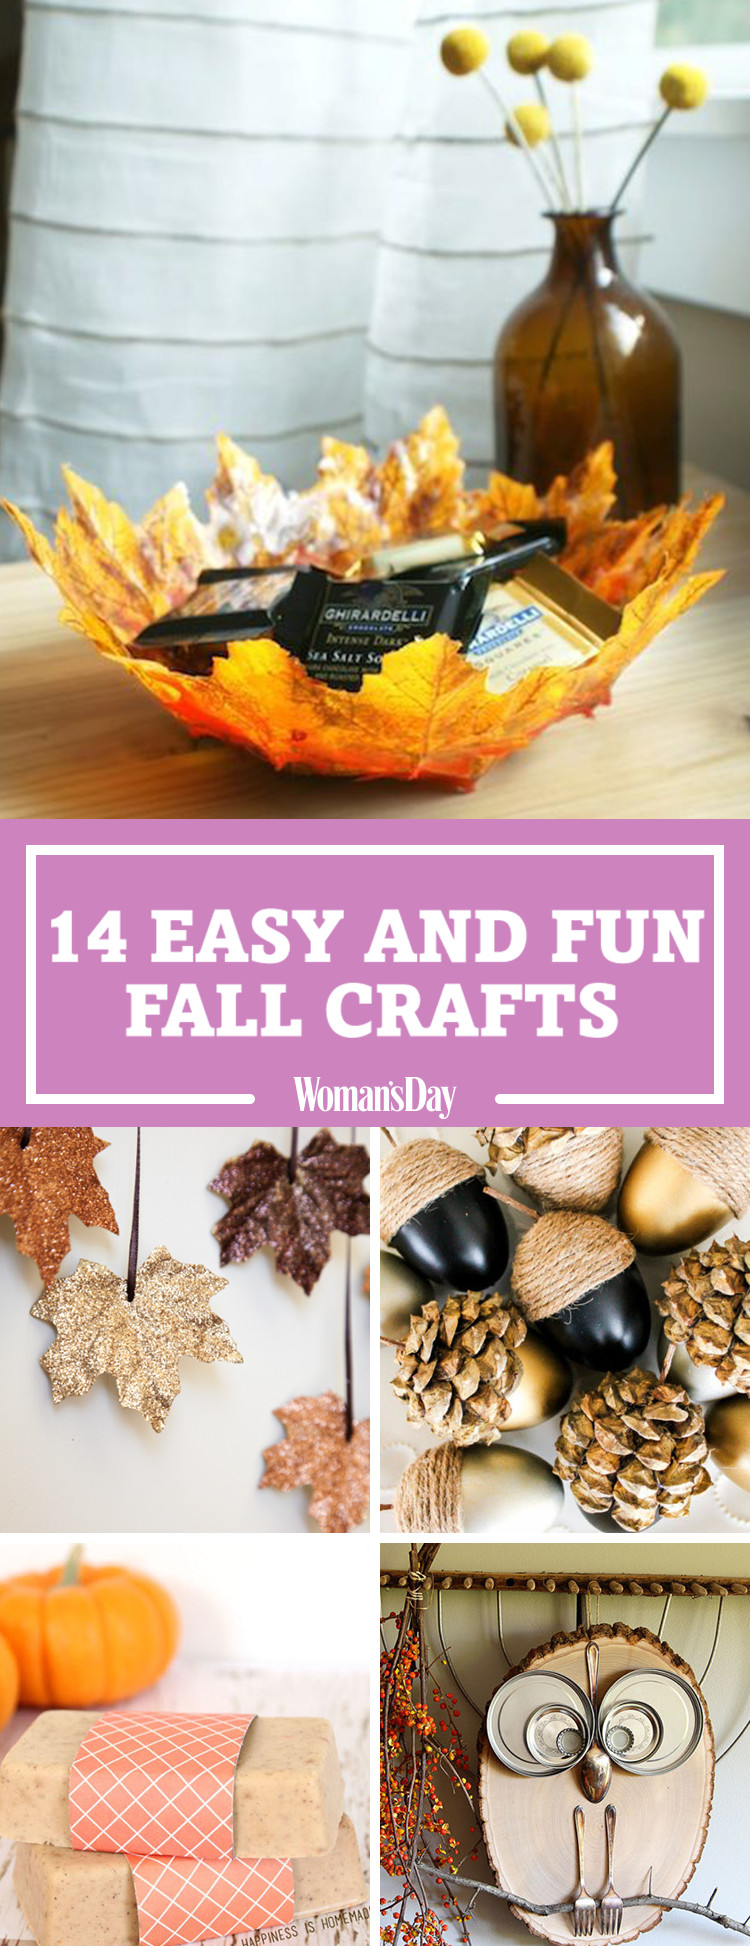 Fun Fall Crafts
 18 Easy Fall Crafts Fun Ideas for Autumn Crafts